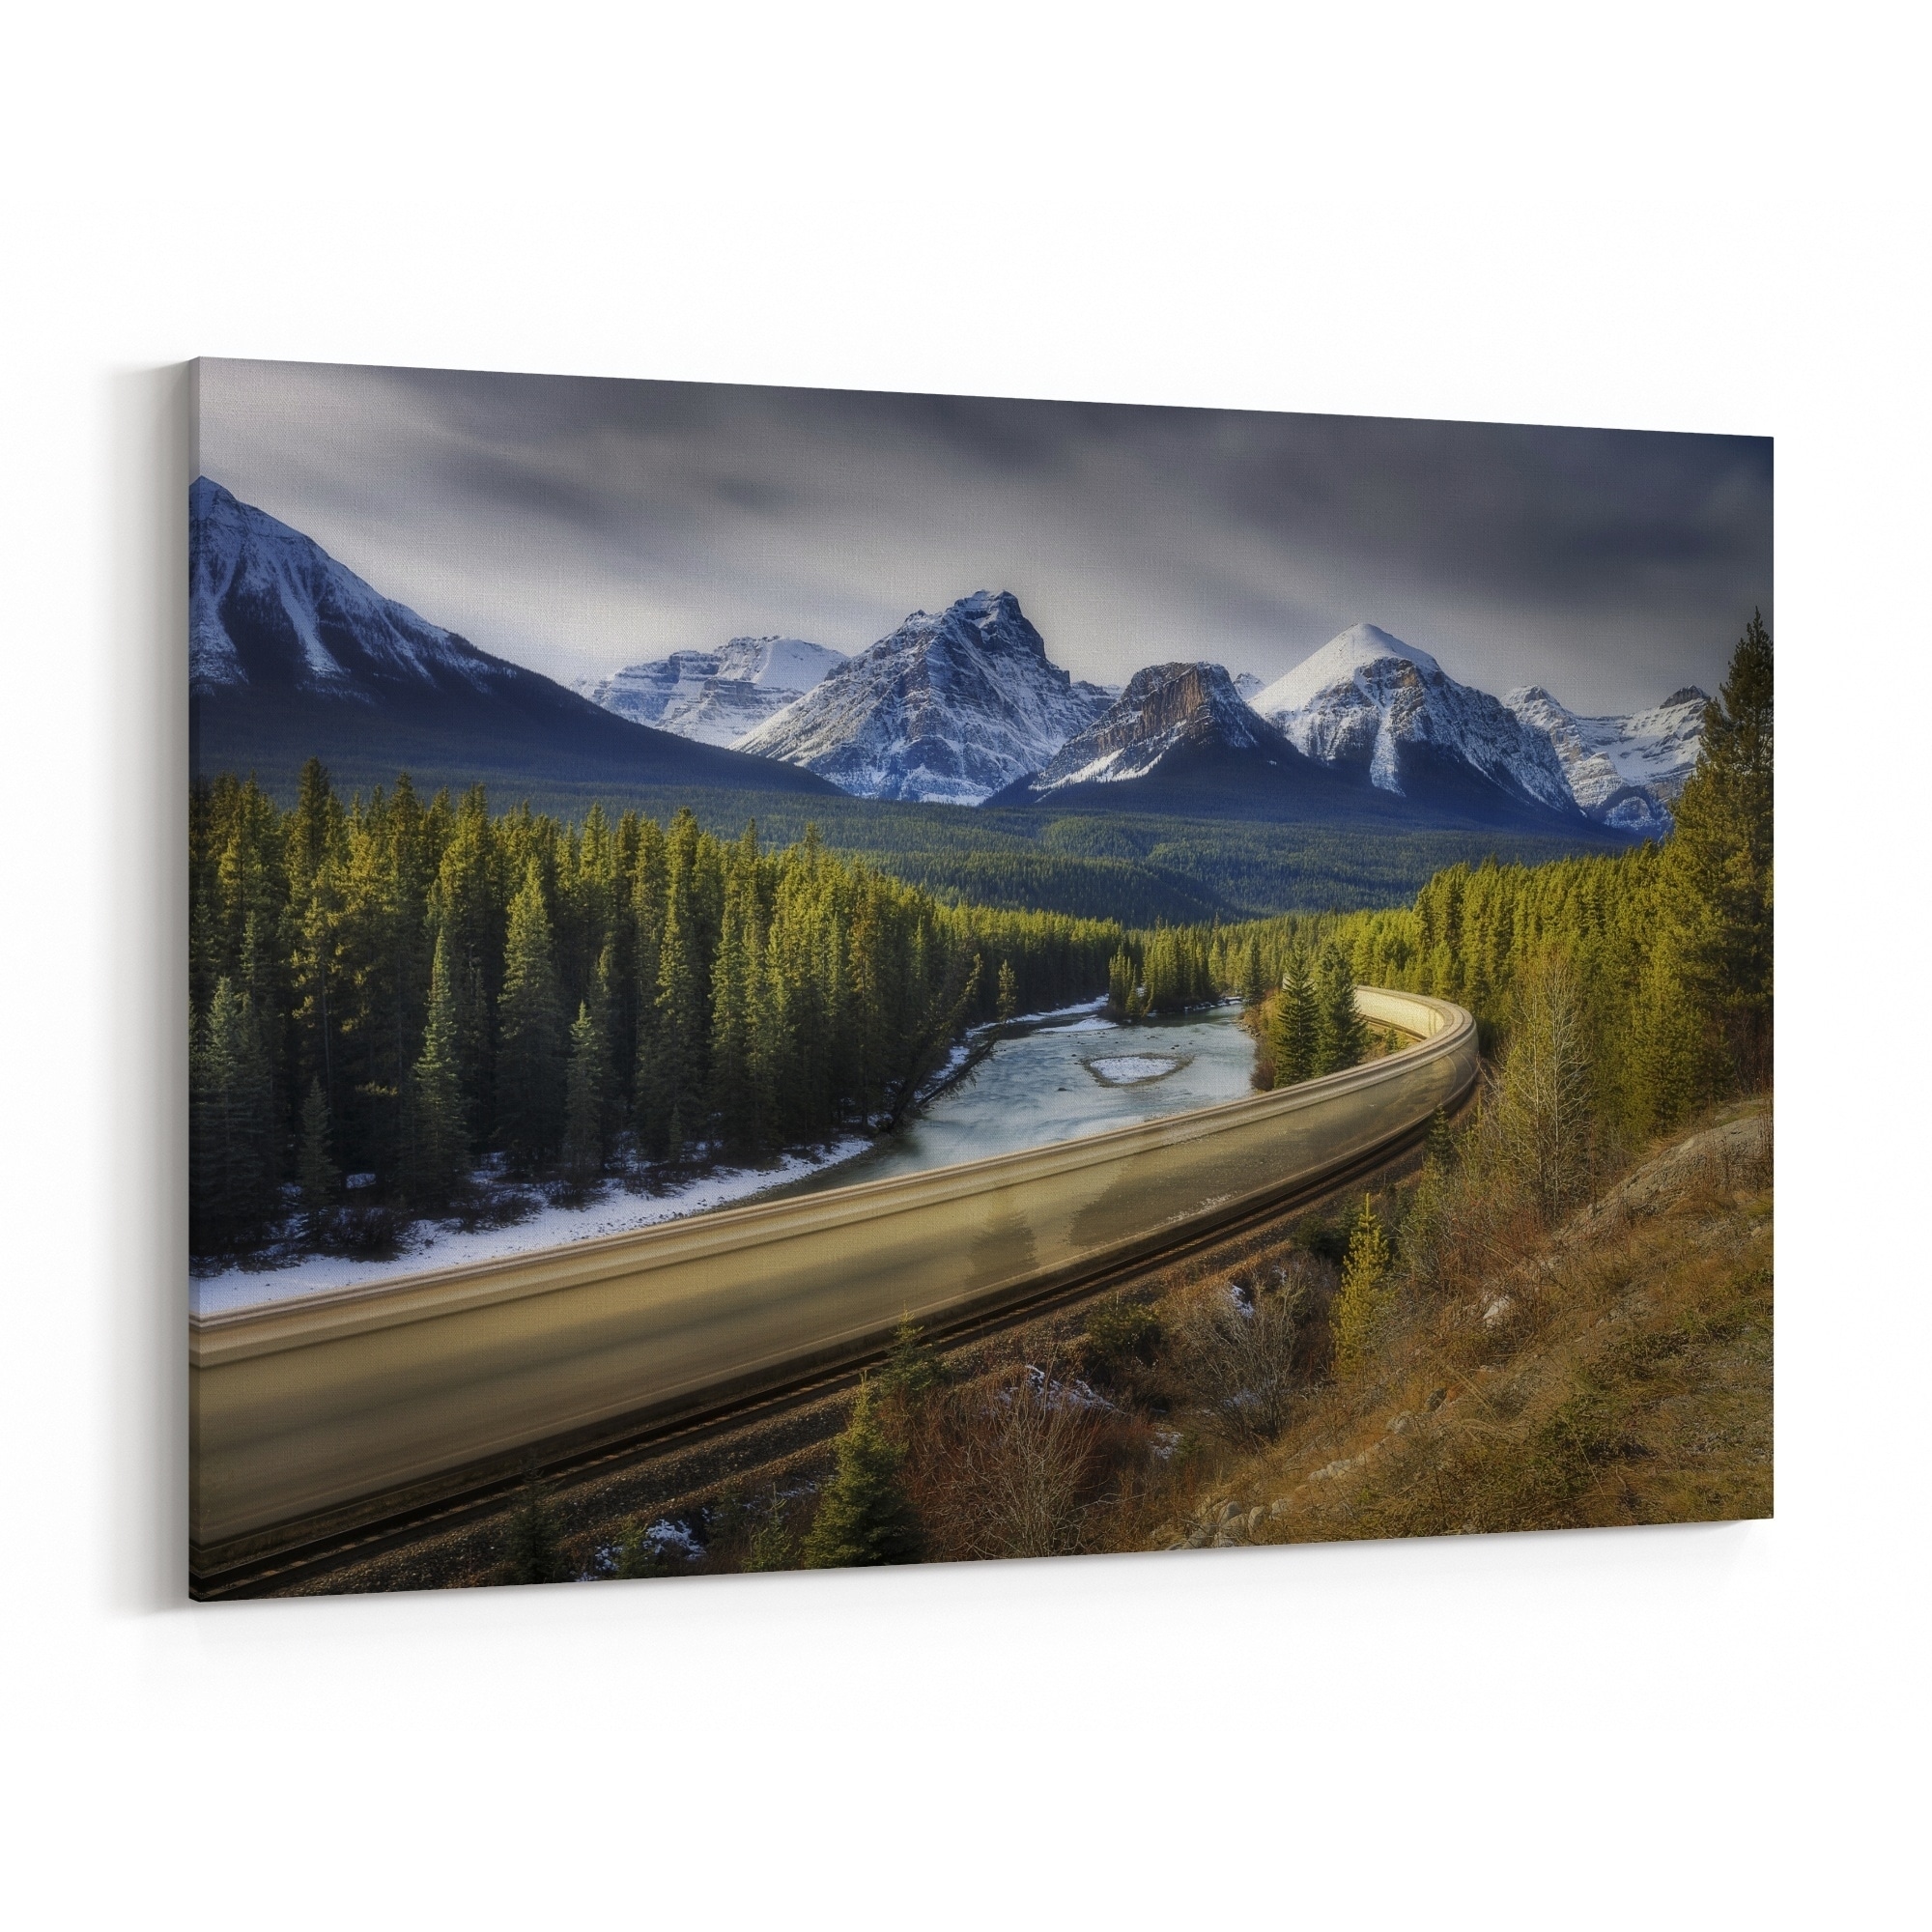 Large Art Prints Canada / Art country canada for the lowest prices on